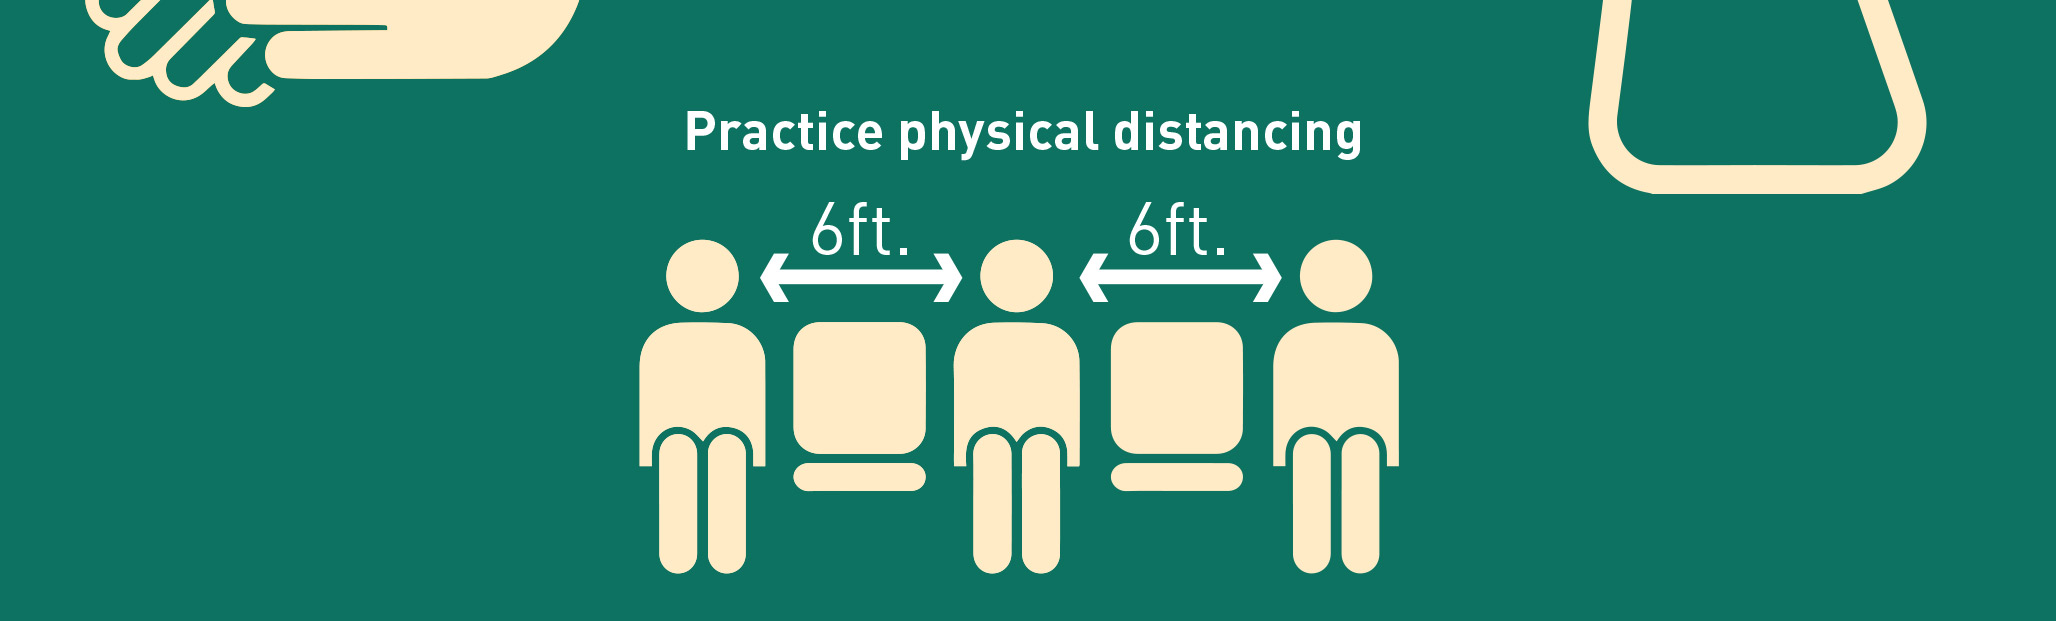 Practice physical distancing.